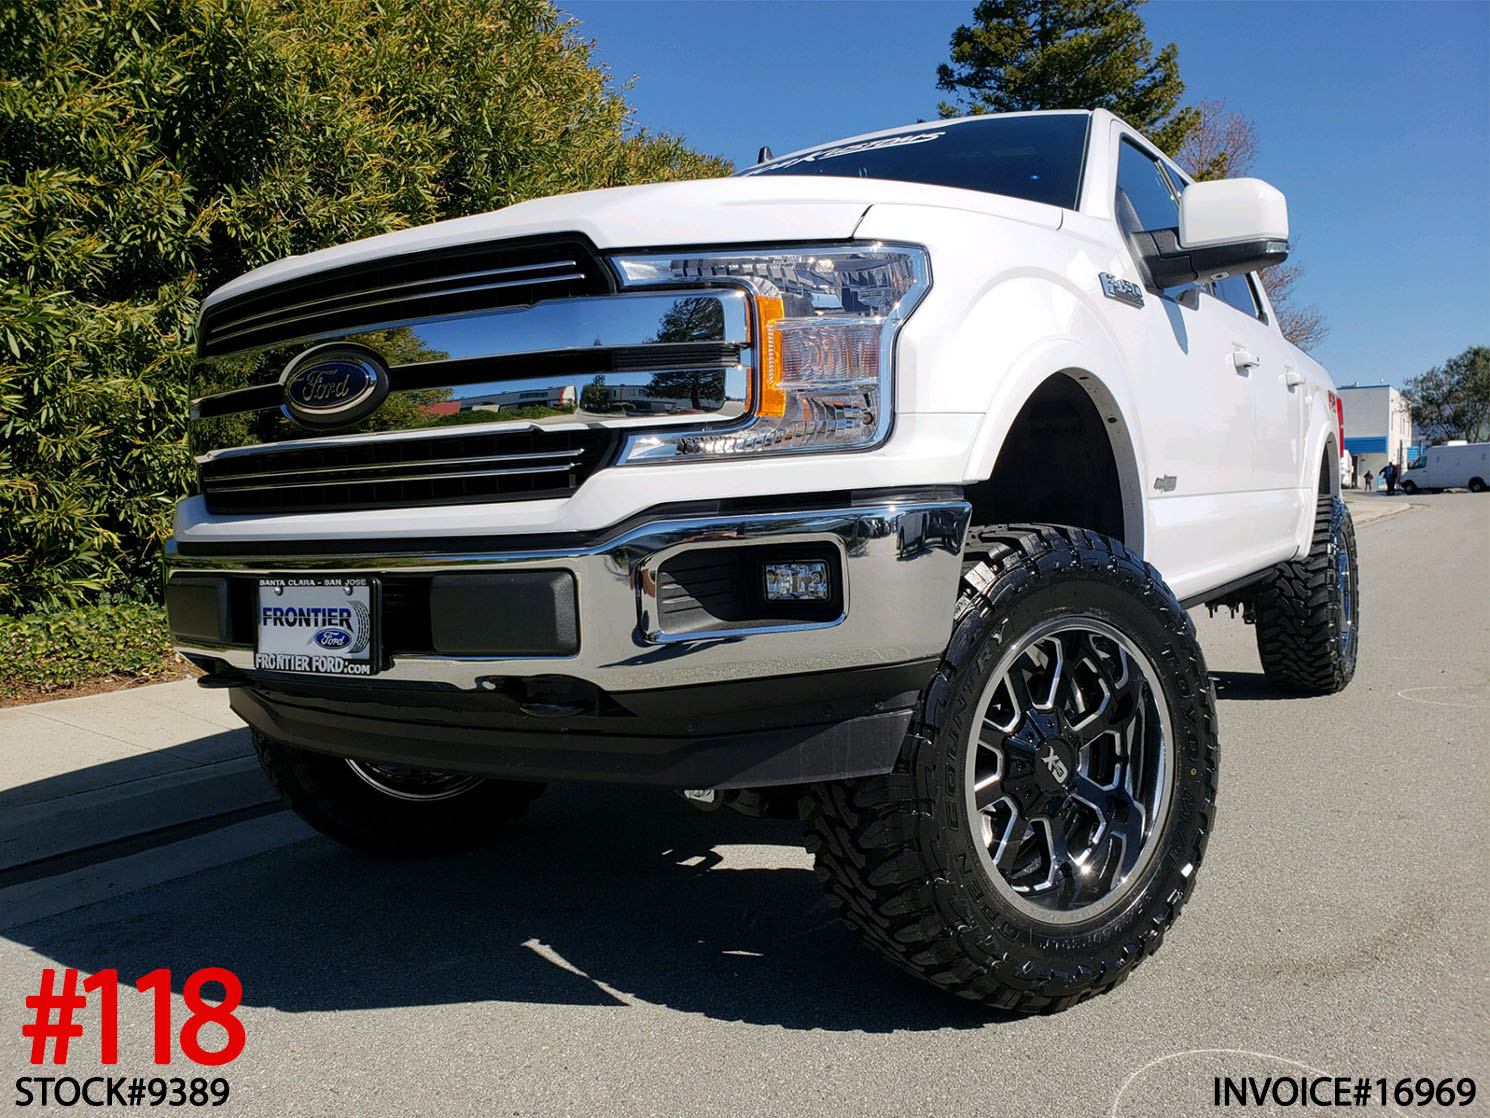 2019 FORD F150 CREW CAB #9389 6″ Offroad Leveling System w/ Shocks, X/D Buck 20x10 Rims, 35″ Toyo Open Country M/T, AMP Electric Side Bars Bars w/ LED.